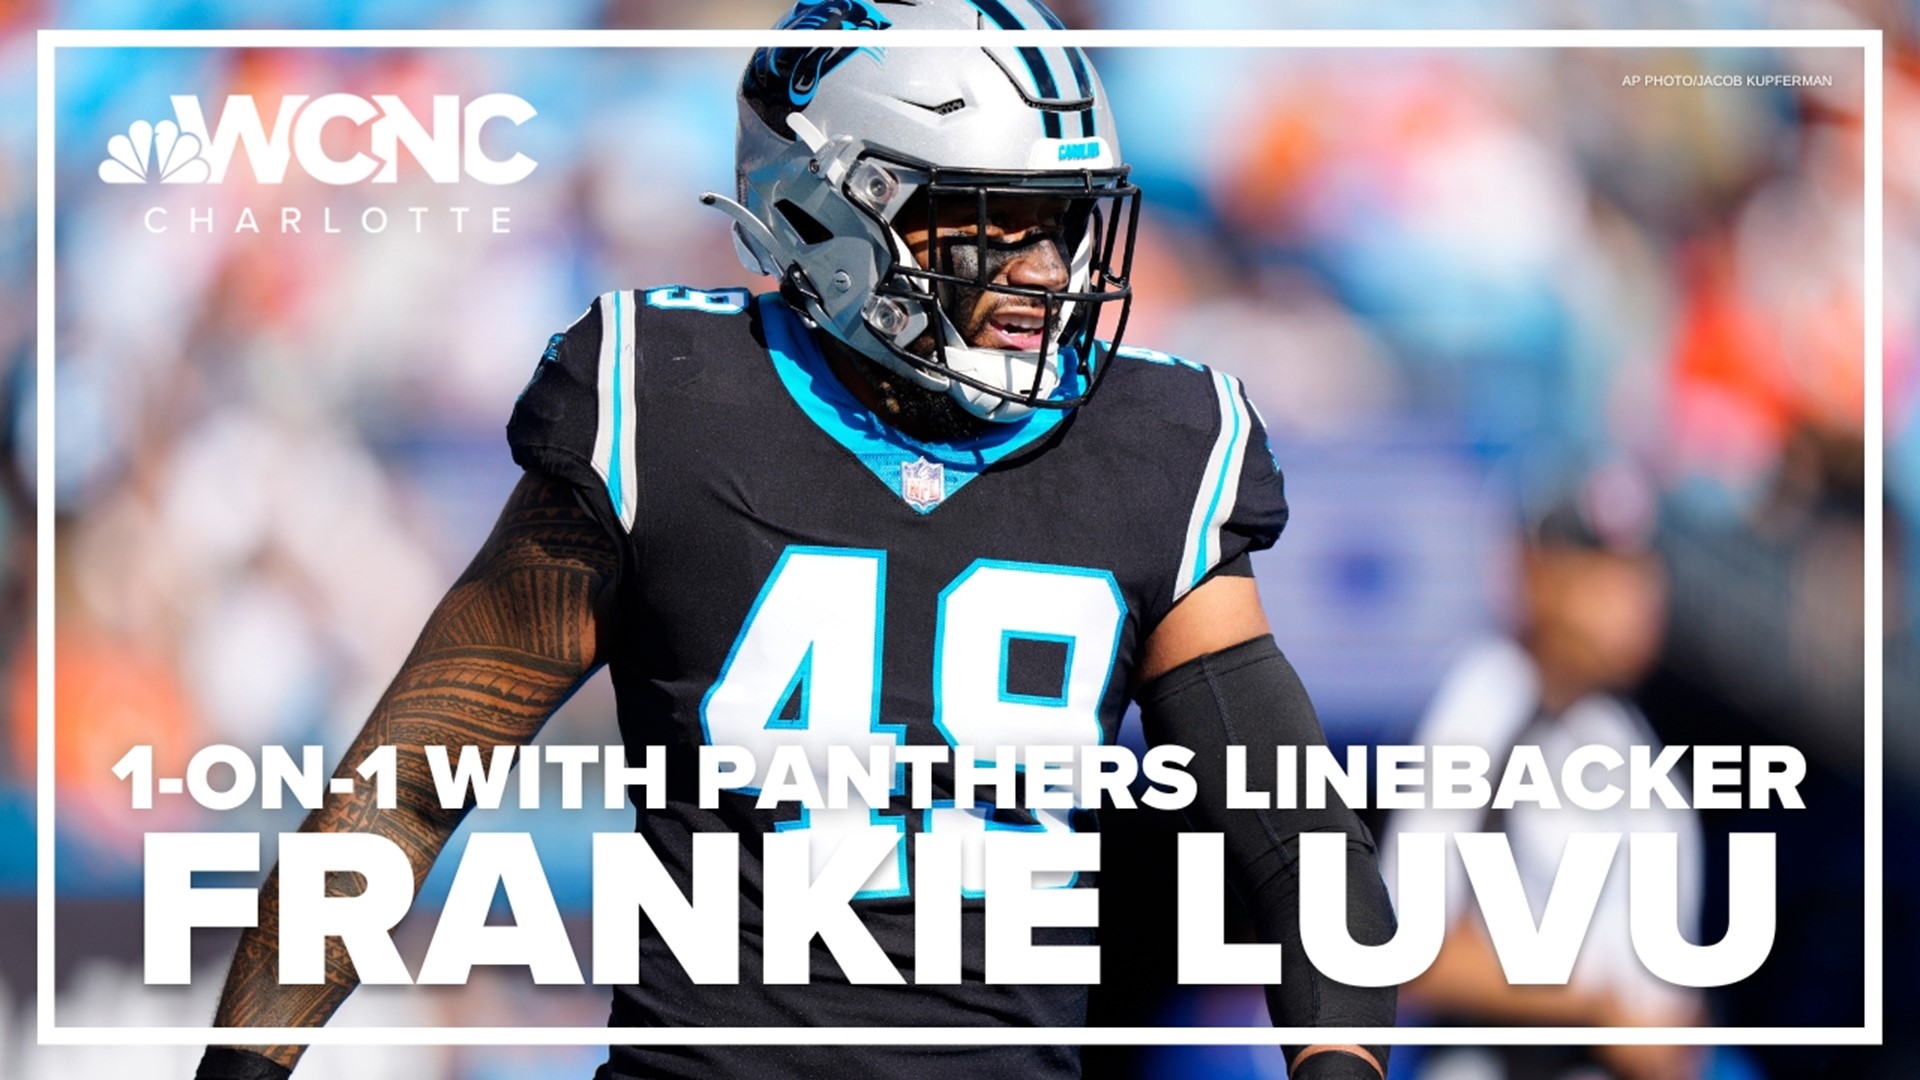 1-on-1 with Panthers linebacker Frankie Luvu